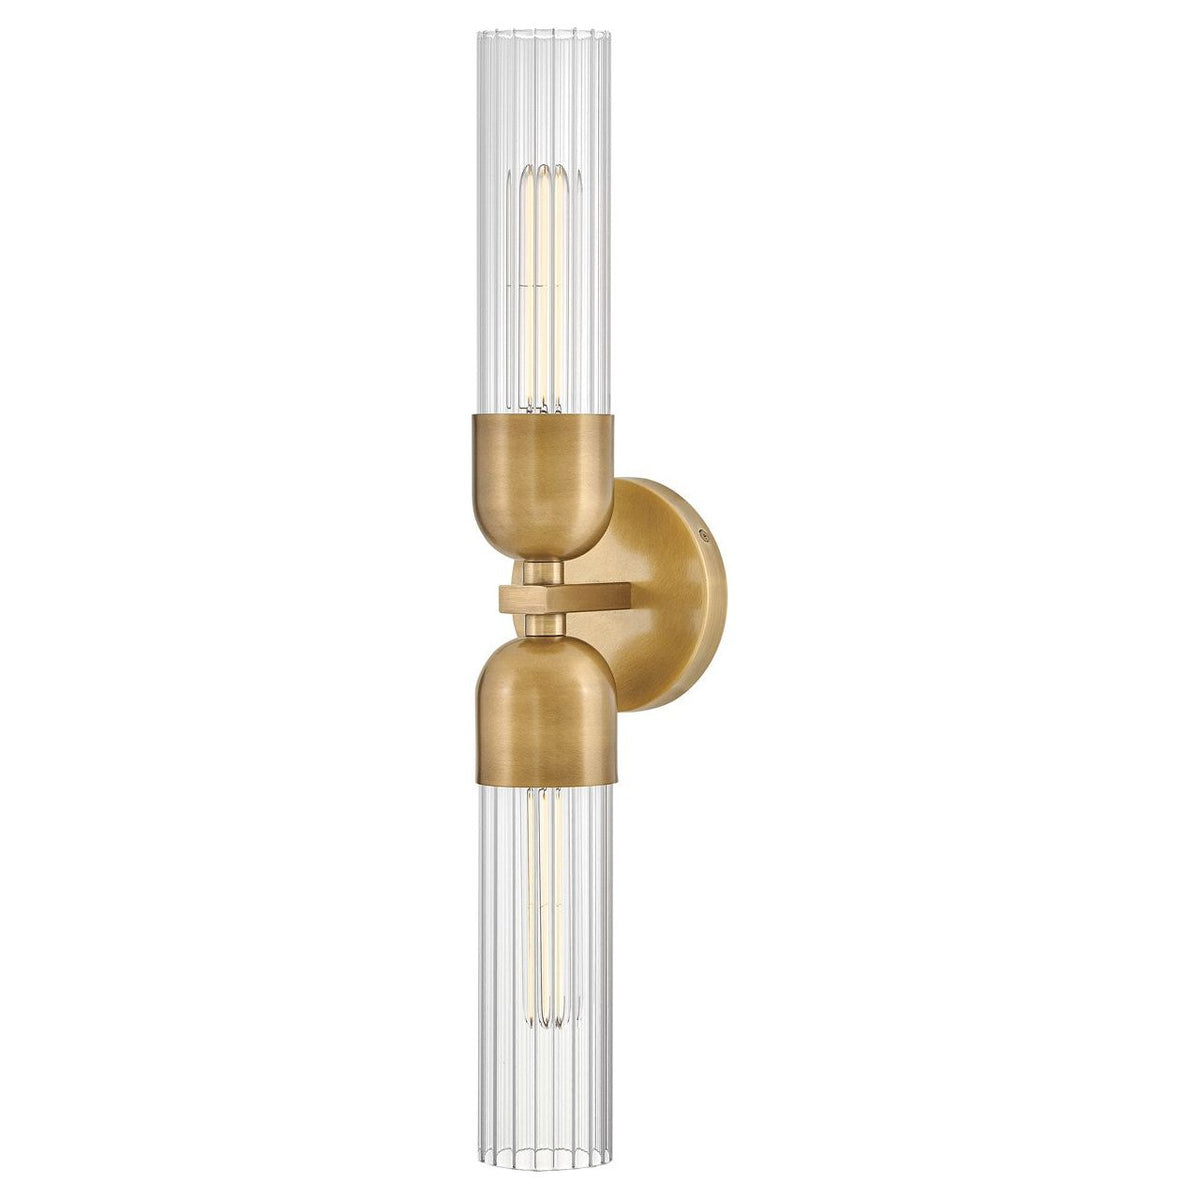 Hinkley Canada - 50912HB - LED Wall Sconce - Soren - Heritage Brass